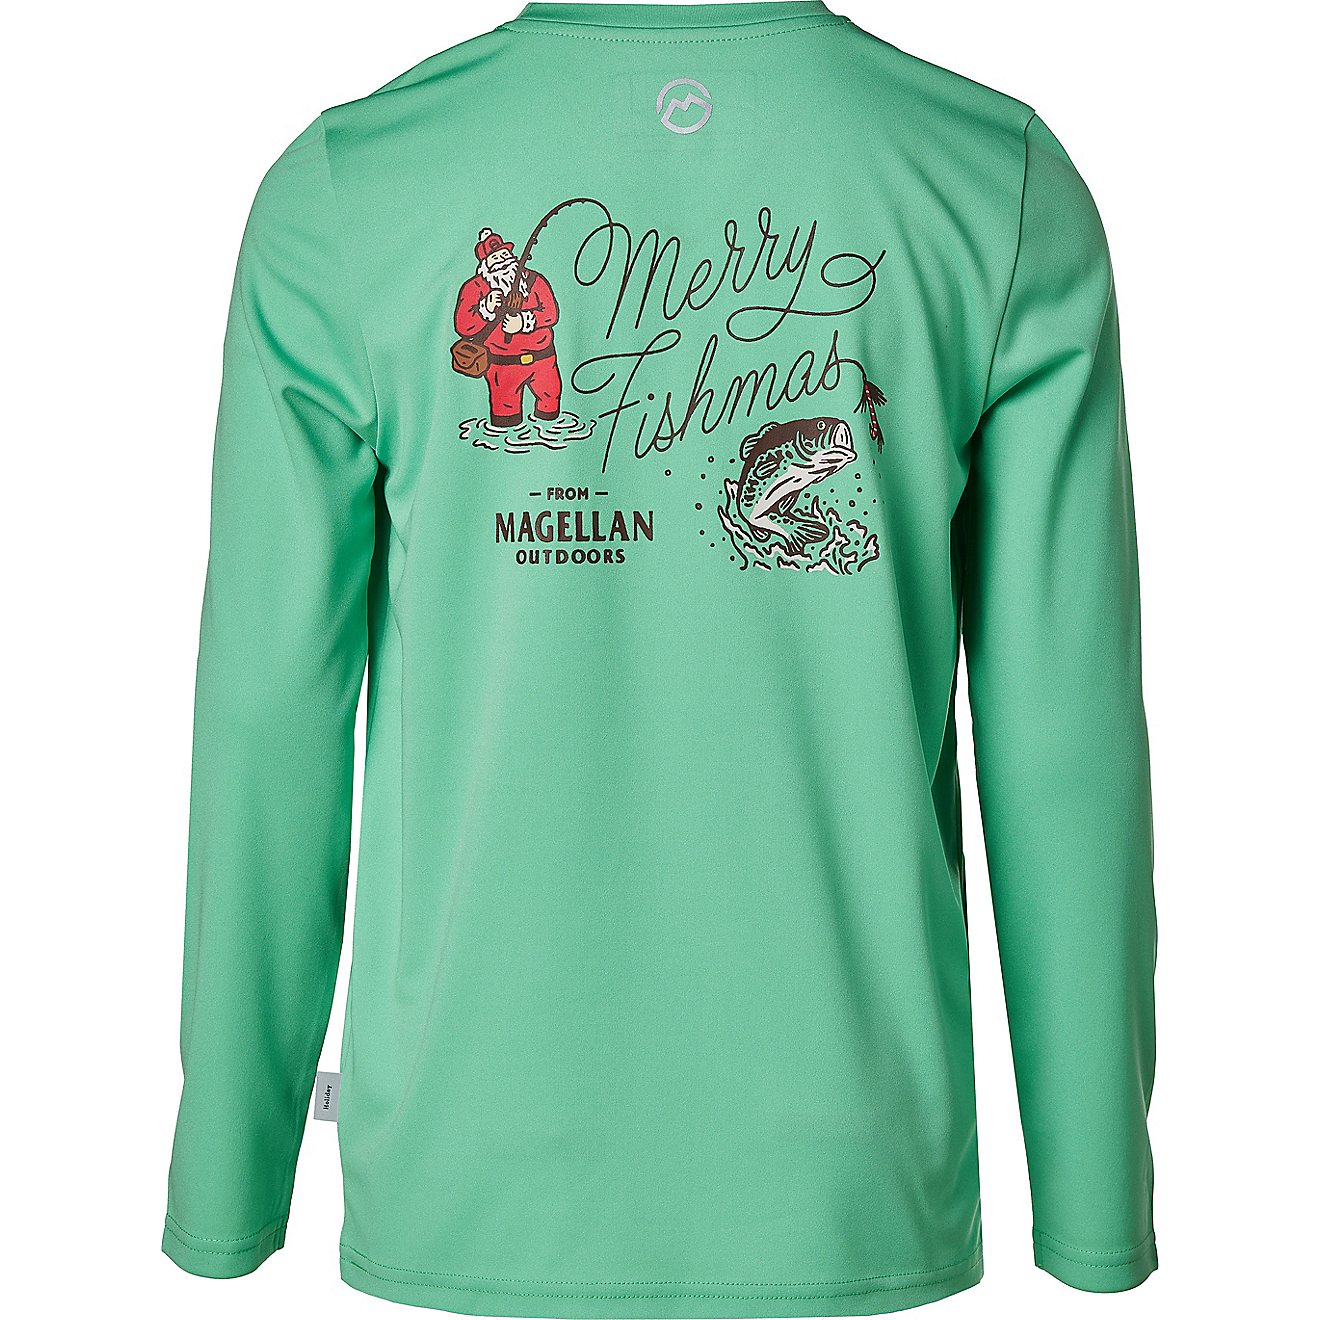 Magellan Outdoors Boys’ Merry Fishmas Graphic Long Sleeve T-shirt                                                              - view number 1